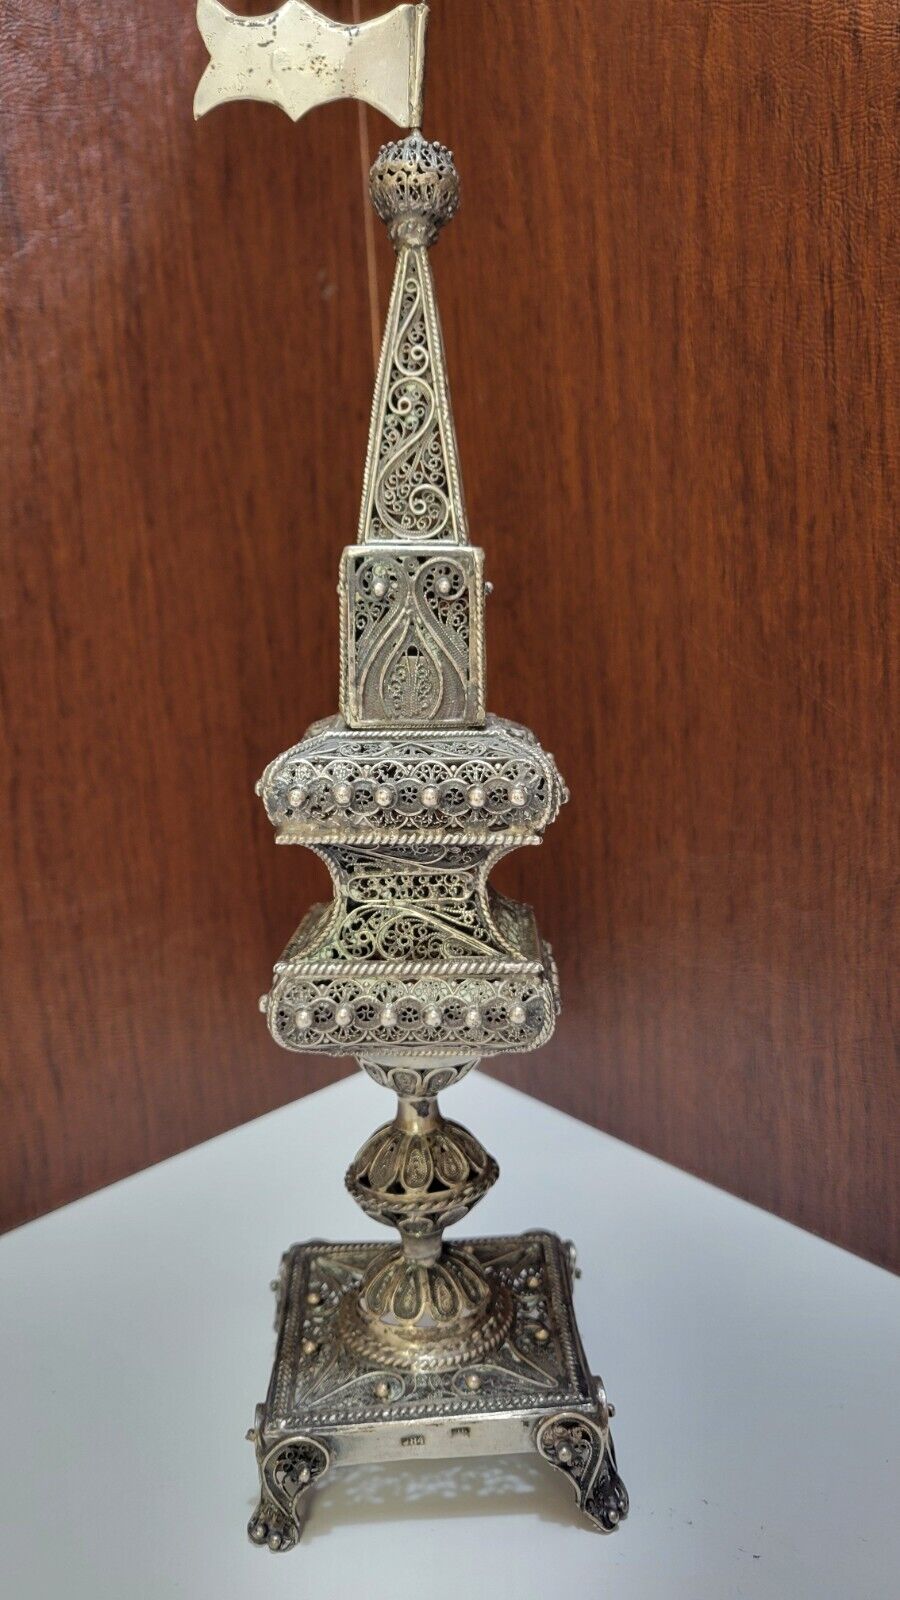 FILIGREE STERLING SILVER JUDAICA LARGE BESOMIM / SPICE TOWER  1865